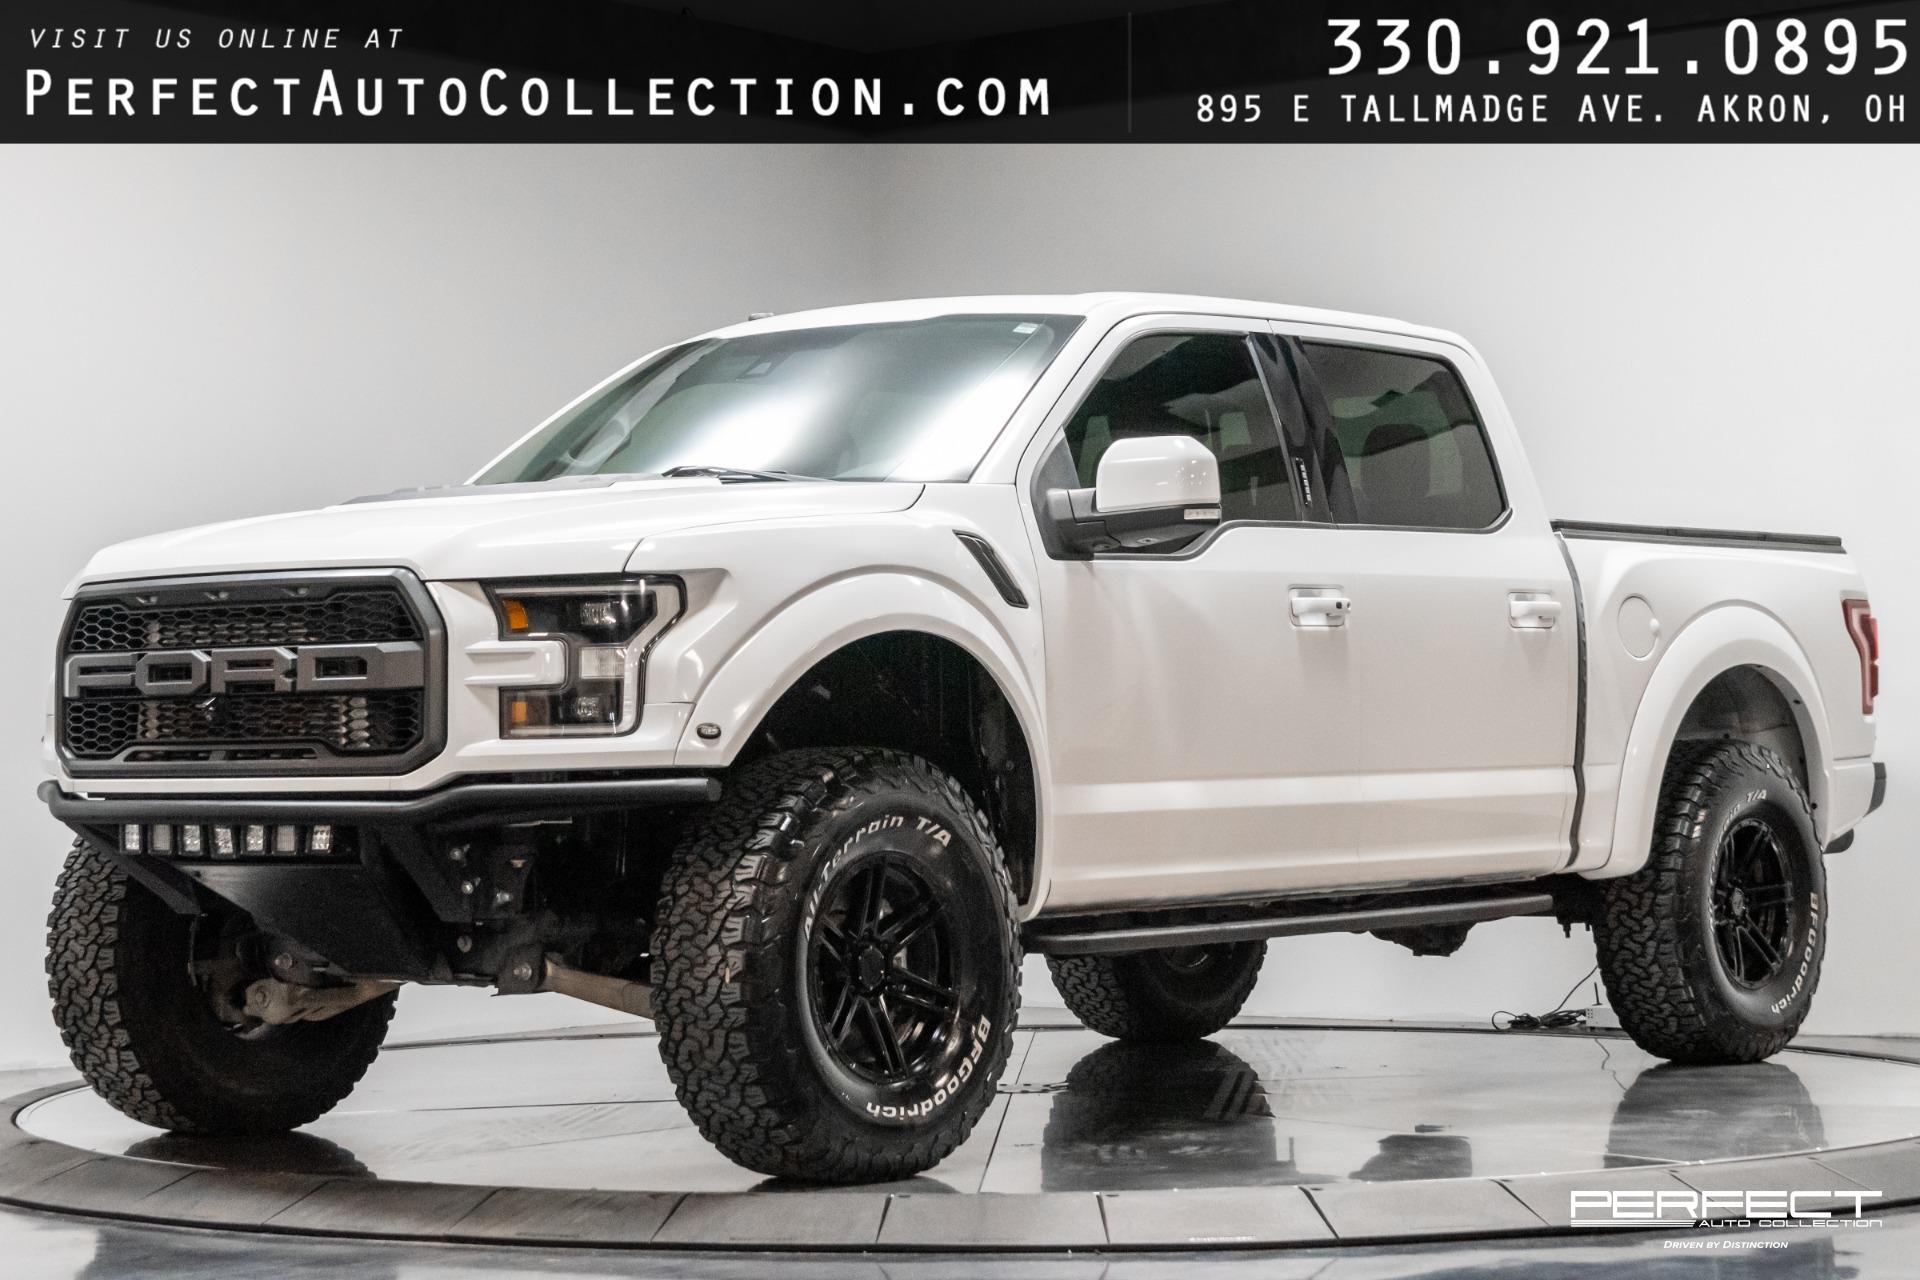 Used 2018 Ford F 150 Raptor For Sale Sold Perfect Auto Collection